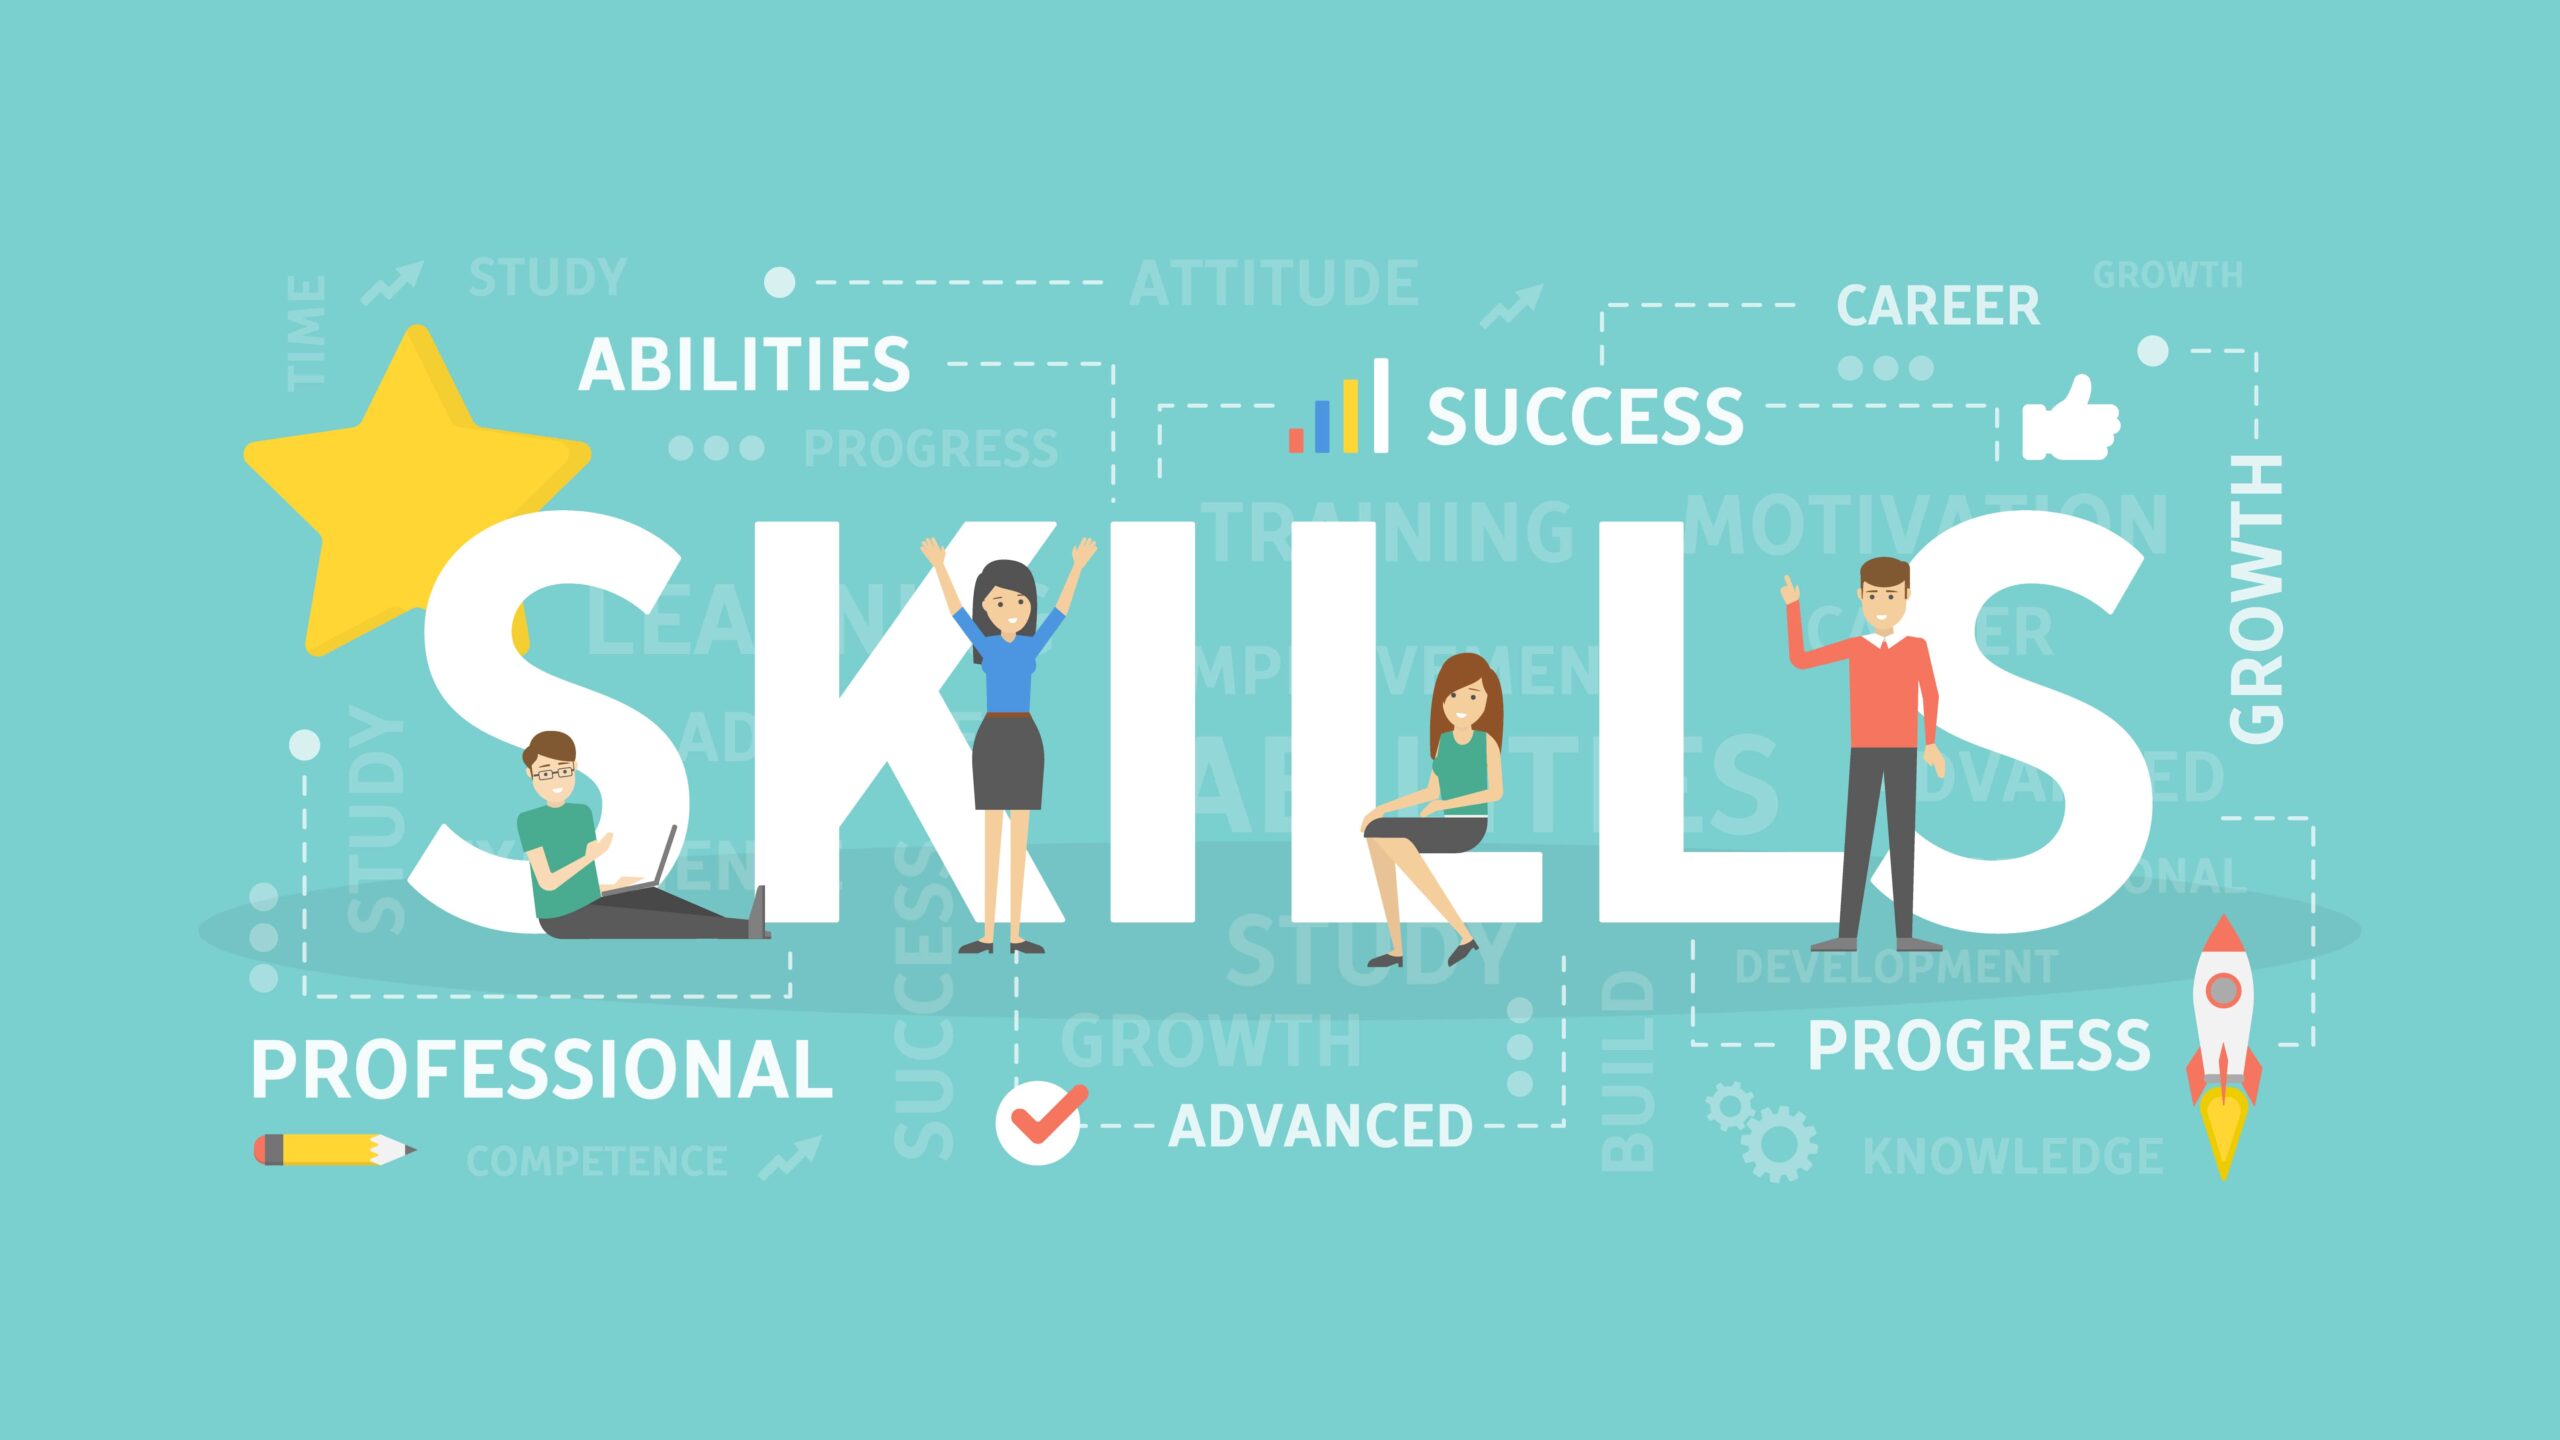 what is important skills or education